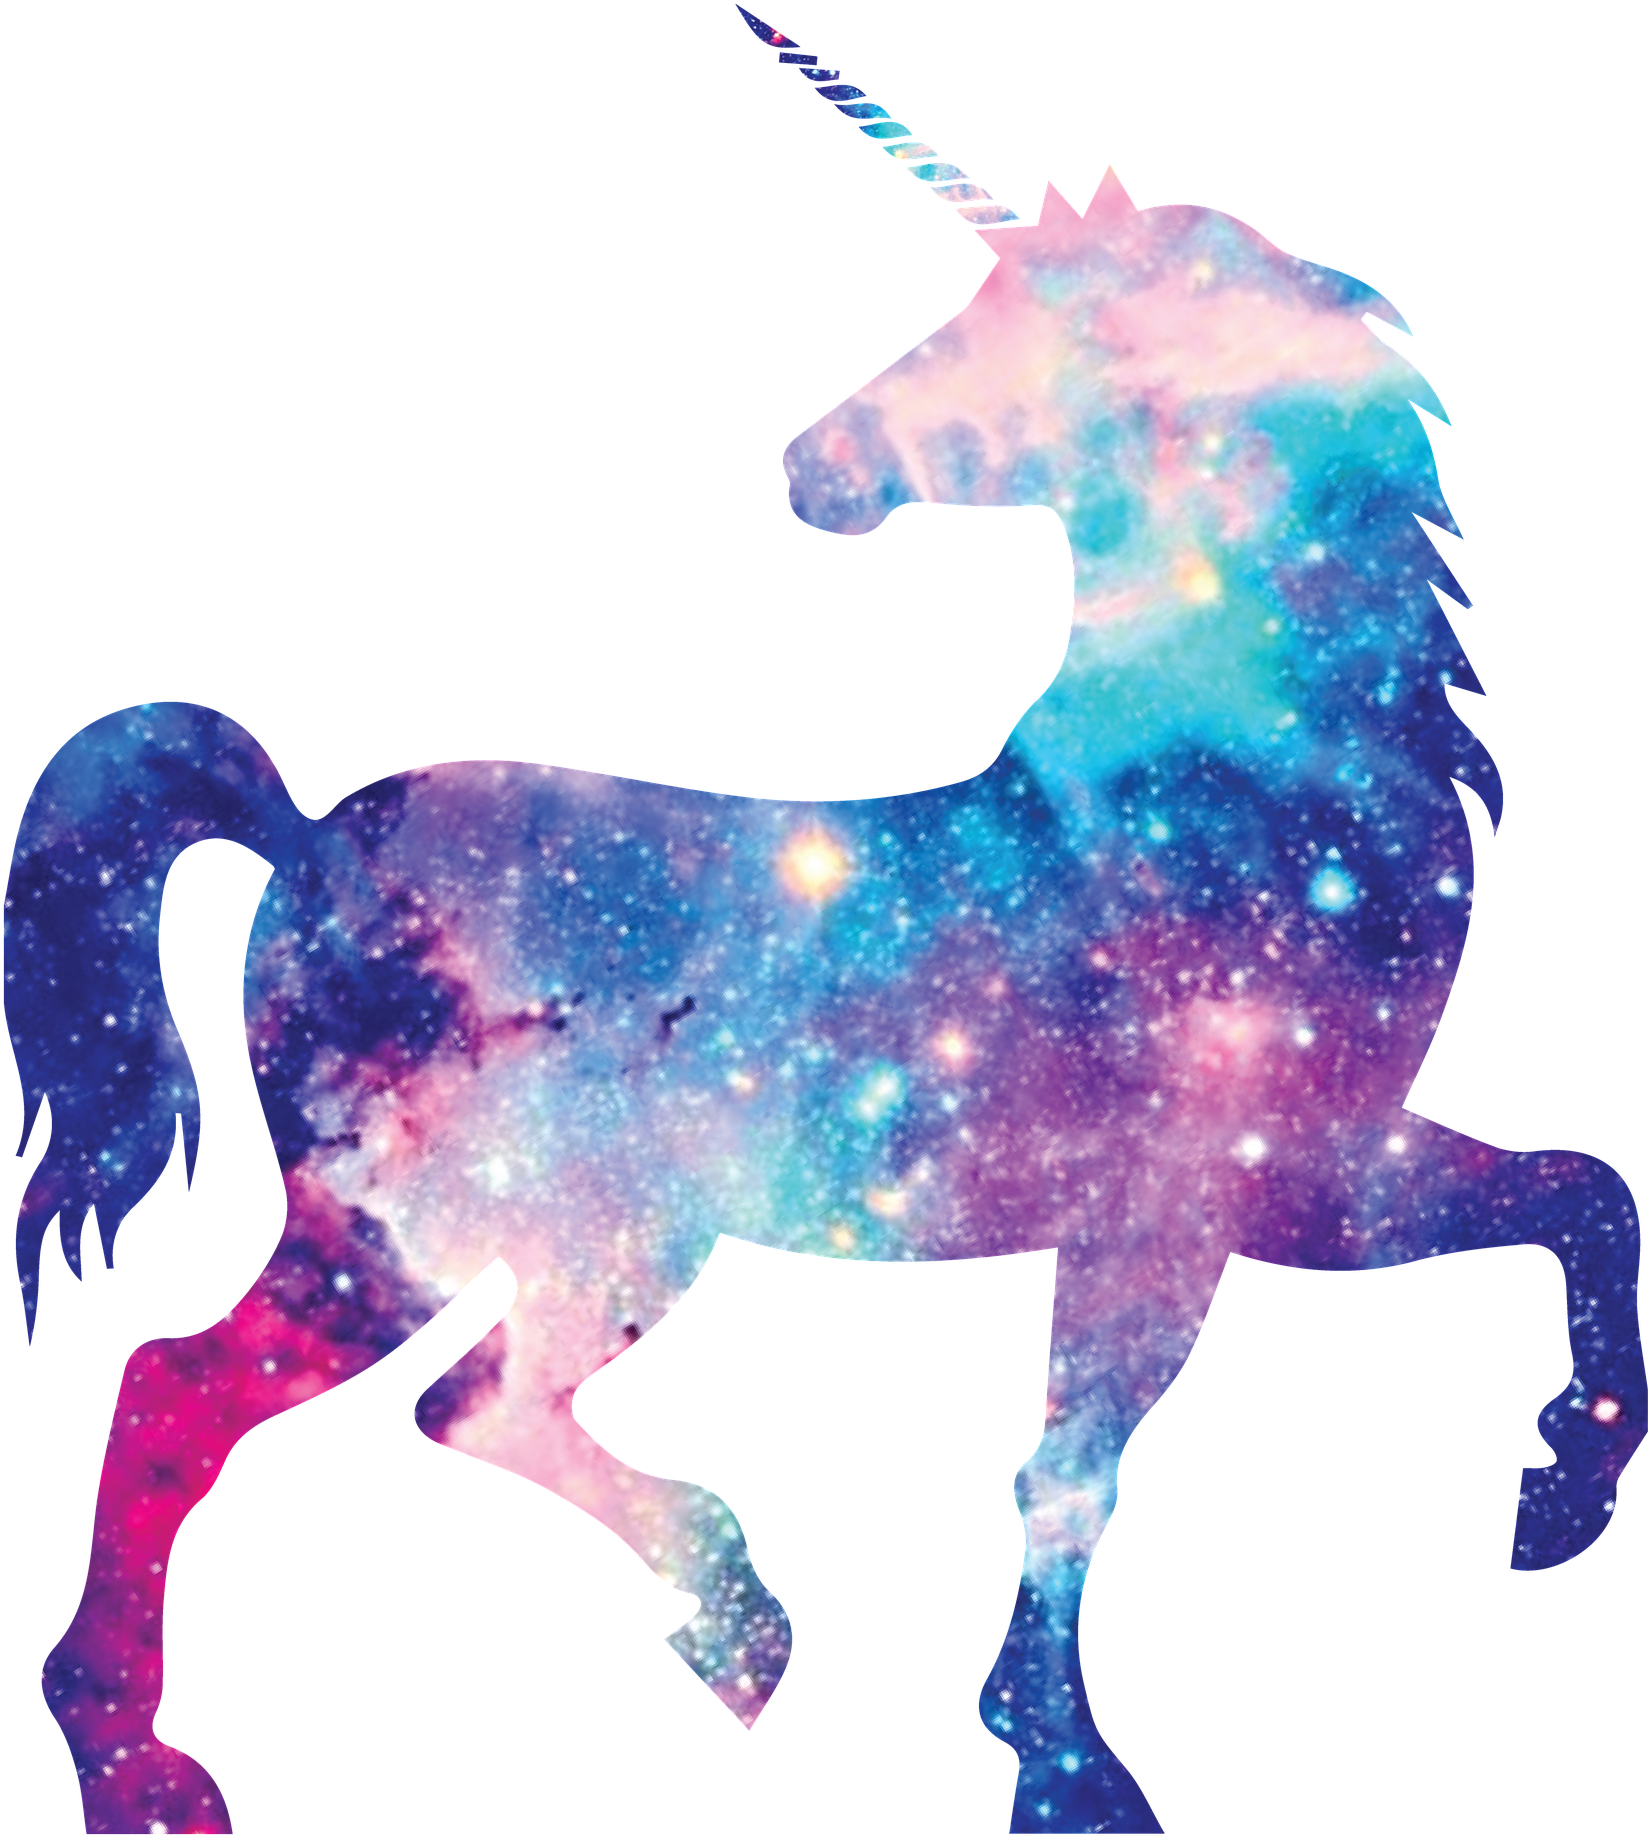 How To Use The Unicorn Frappuccino Filter On Snapchat - Unicorn Galaxy.